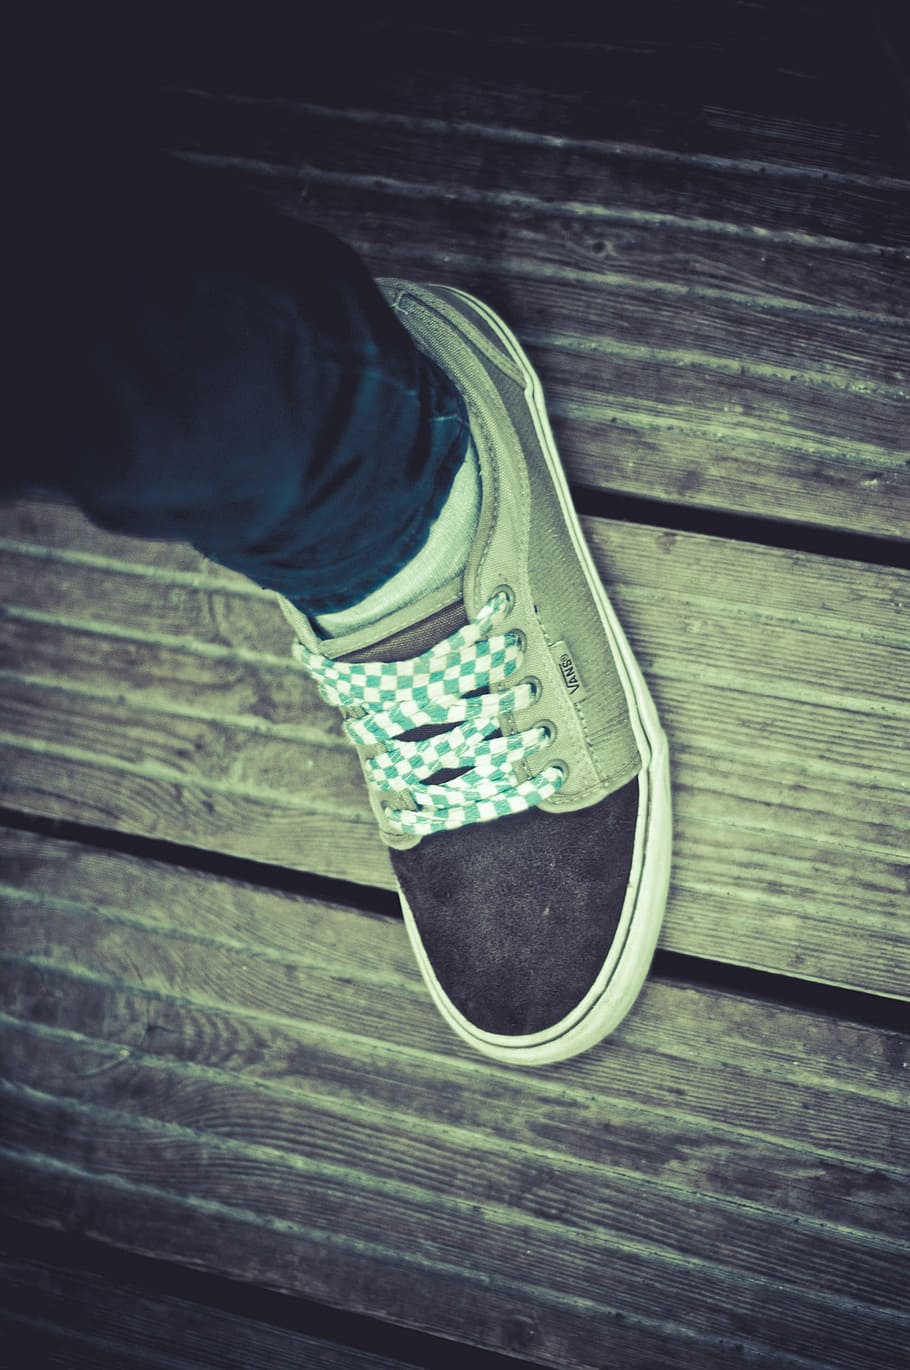 person wearing black and gray Vans skate shoe, unpaired, chukka